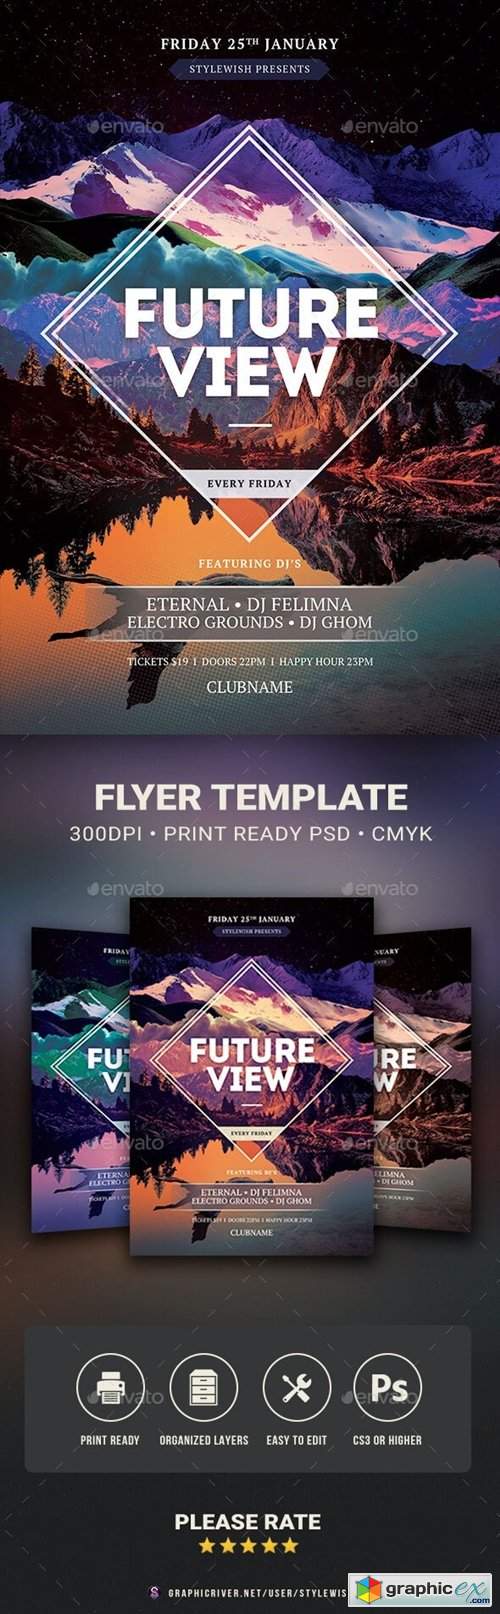  Future View Flyer 